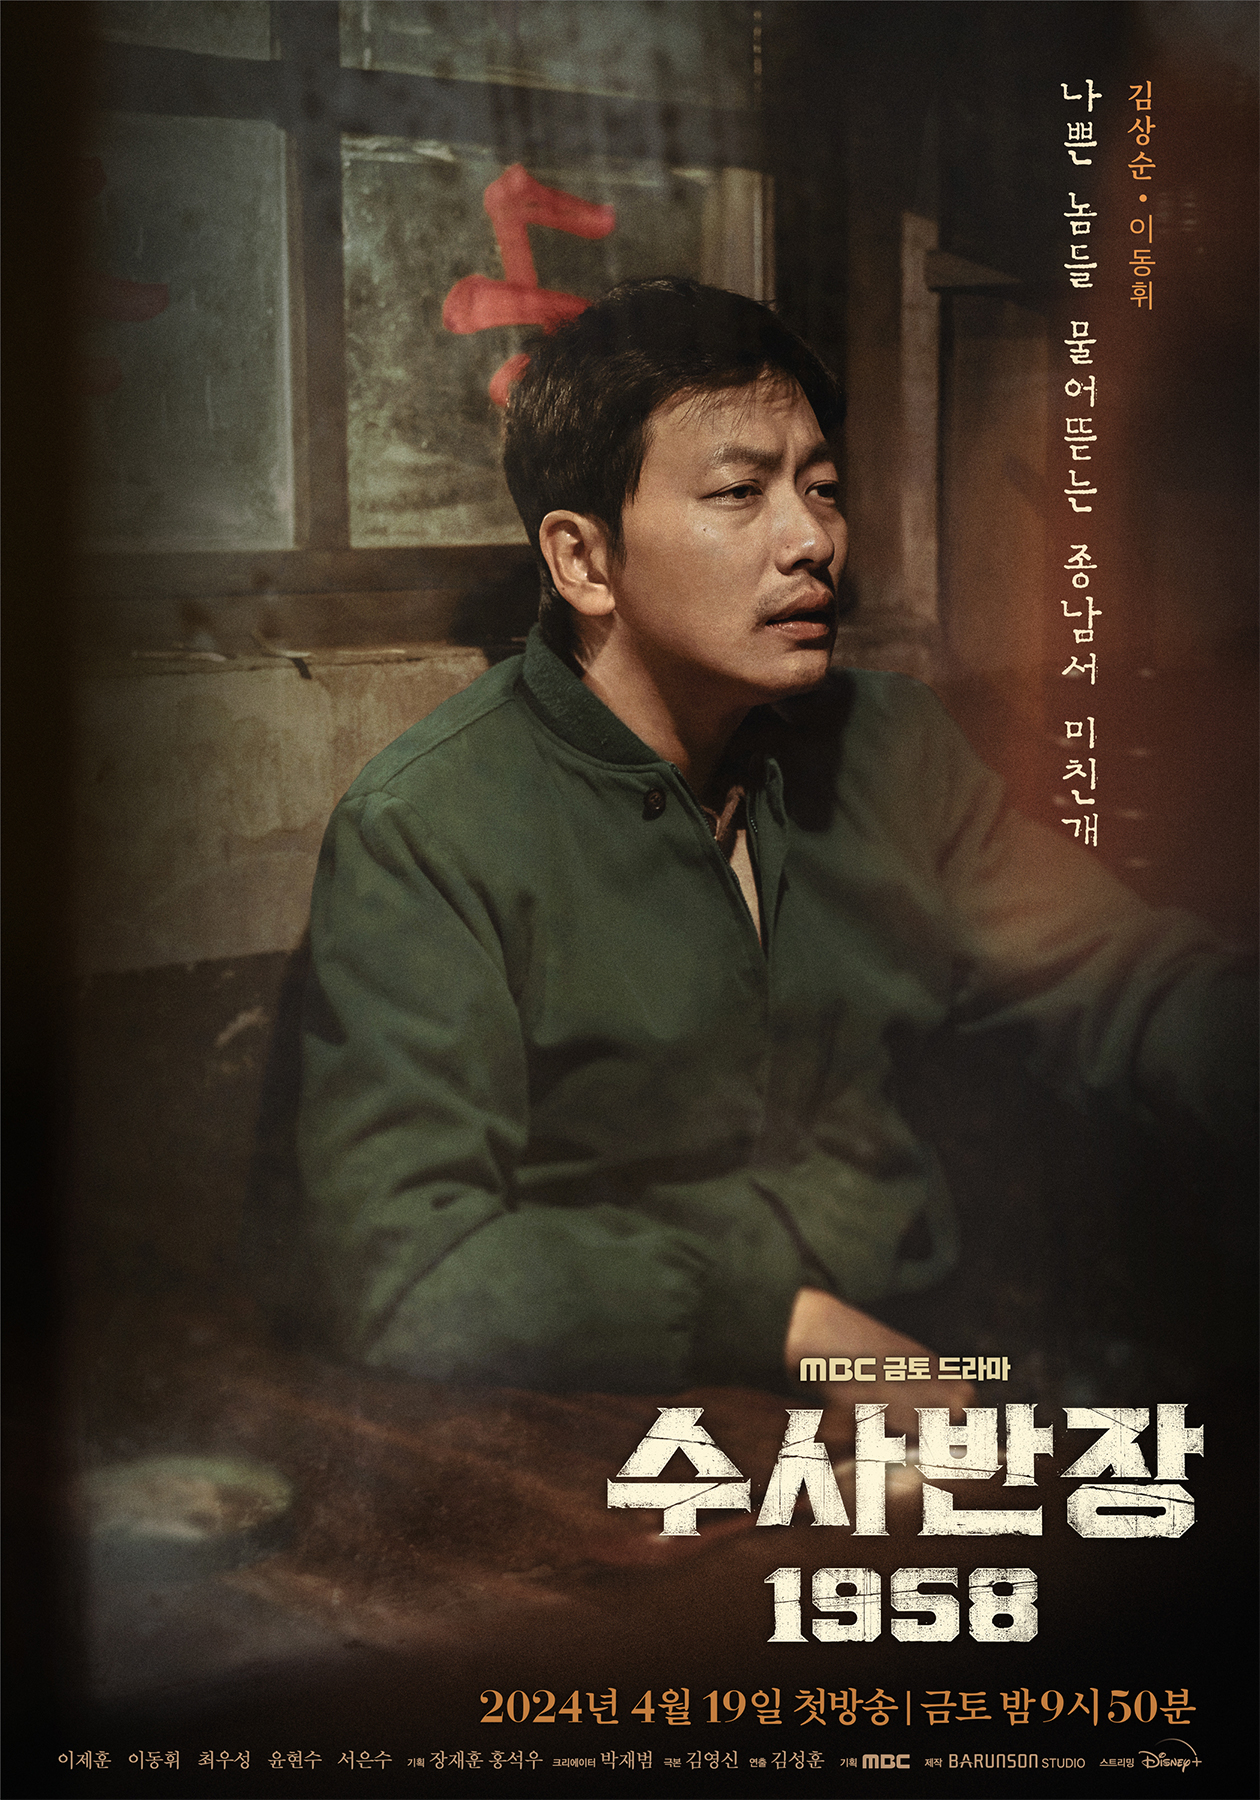 Lee Je Hoon, Lee Dong Hwi, And More Each Have Their Own Stories In “Chief Detective 1958” Posters